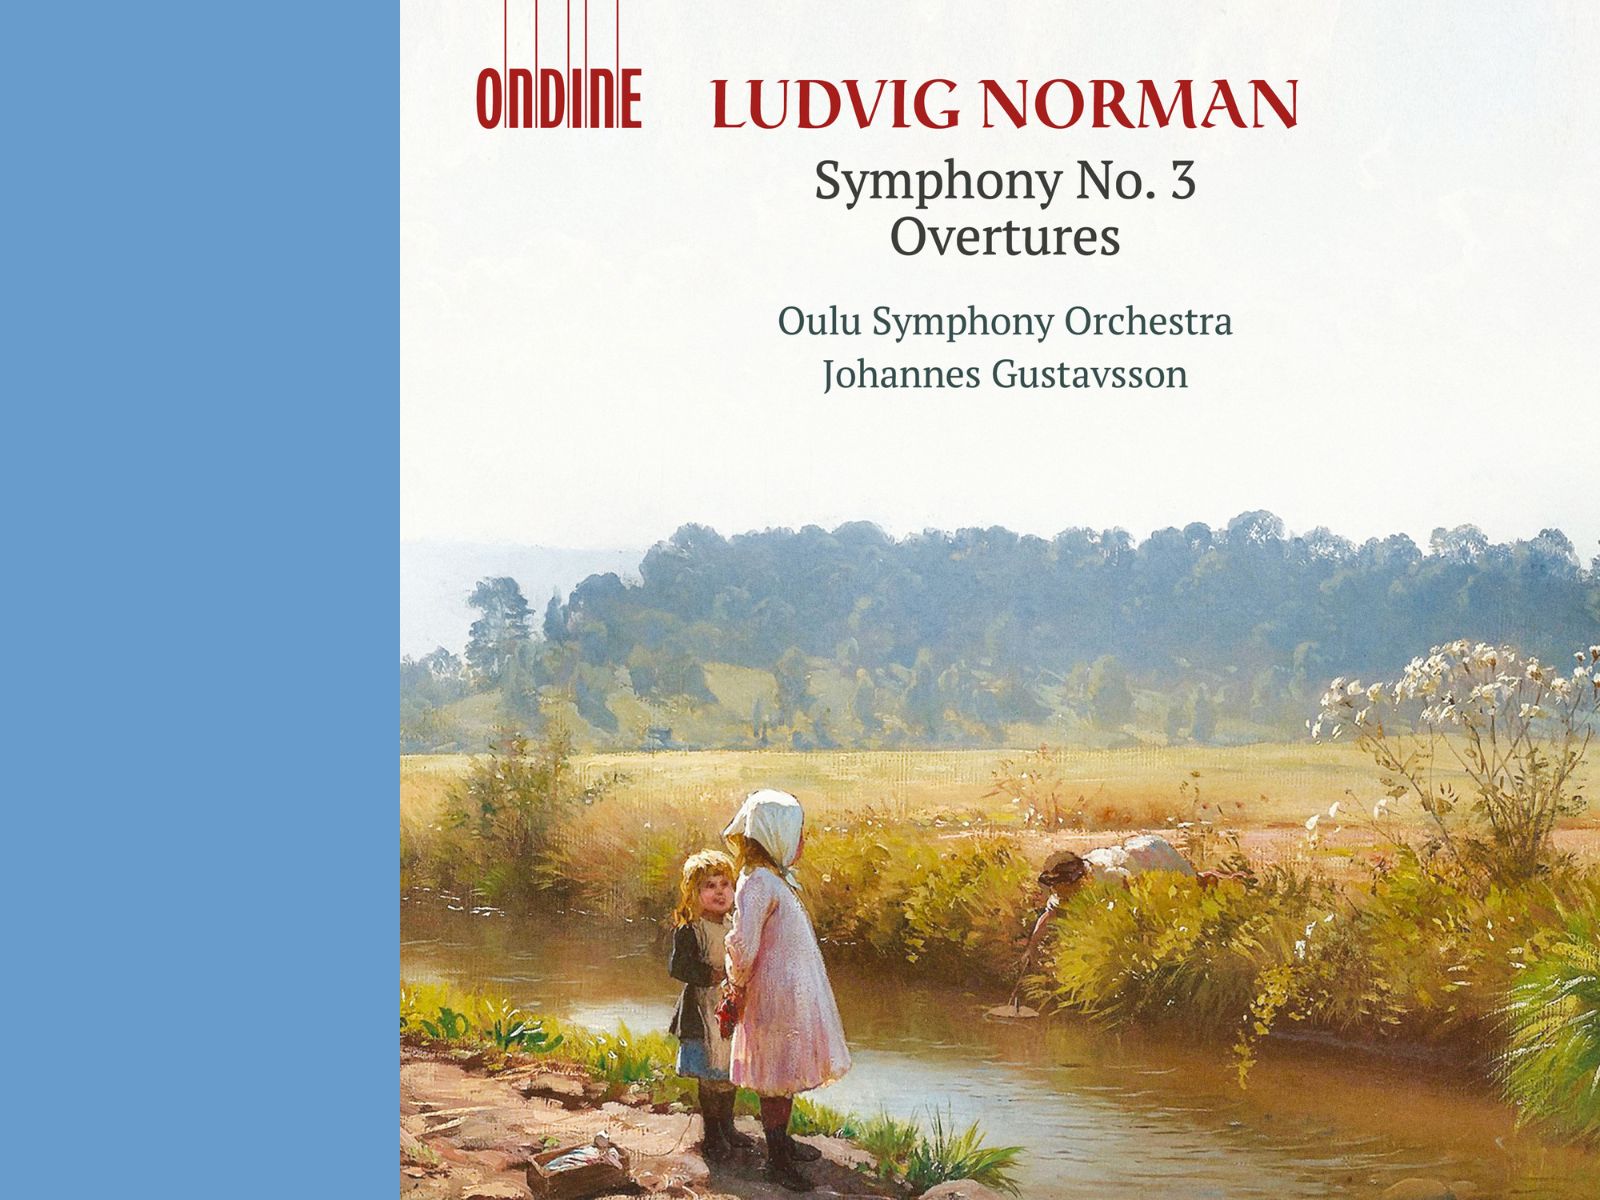 Oulu Symphony Orchestra publishes an album of music by Ludvig Norman